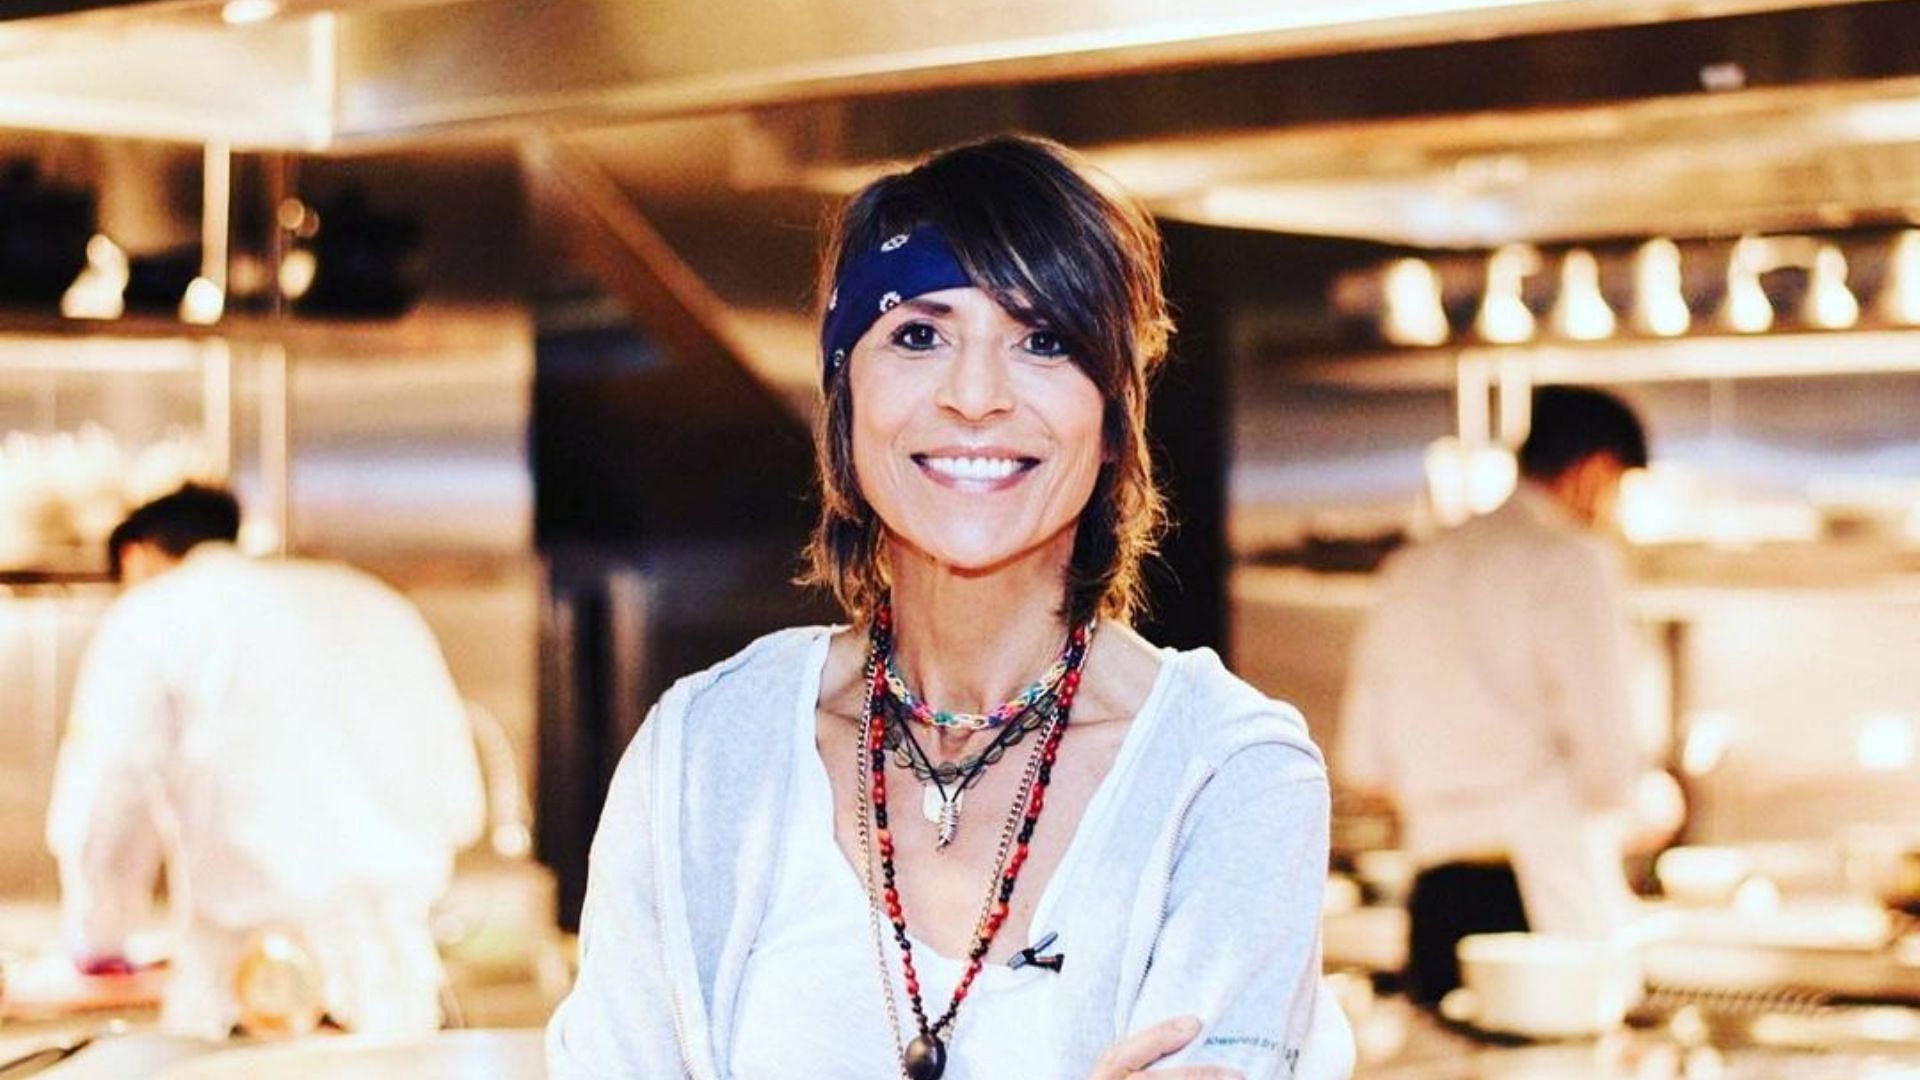 French chef Dominique Crenn to appear on Iron Chef airing on June 15 (Image via dominiquecrenn/Instagram)